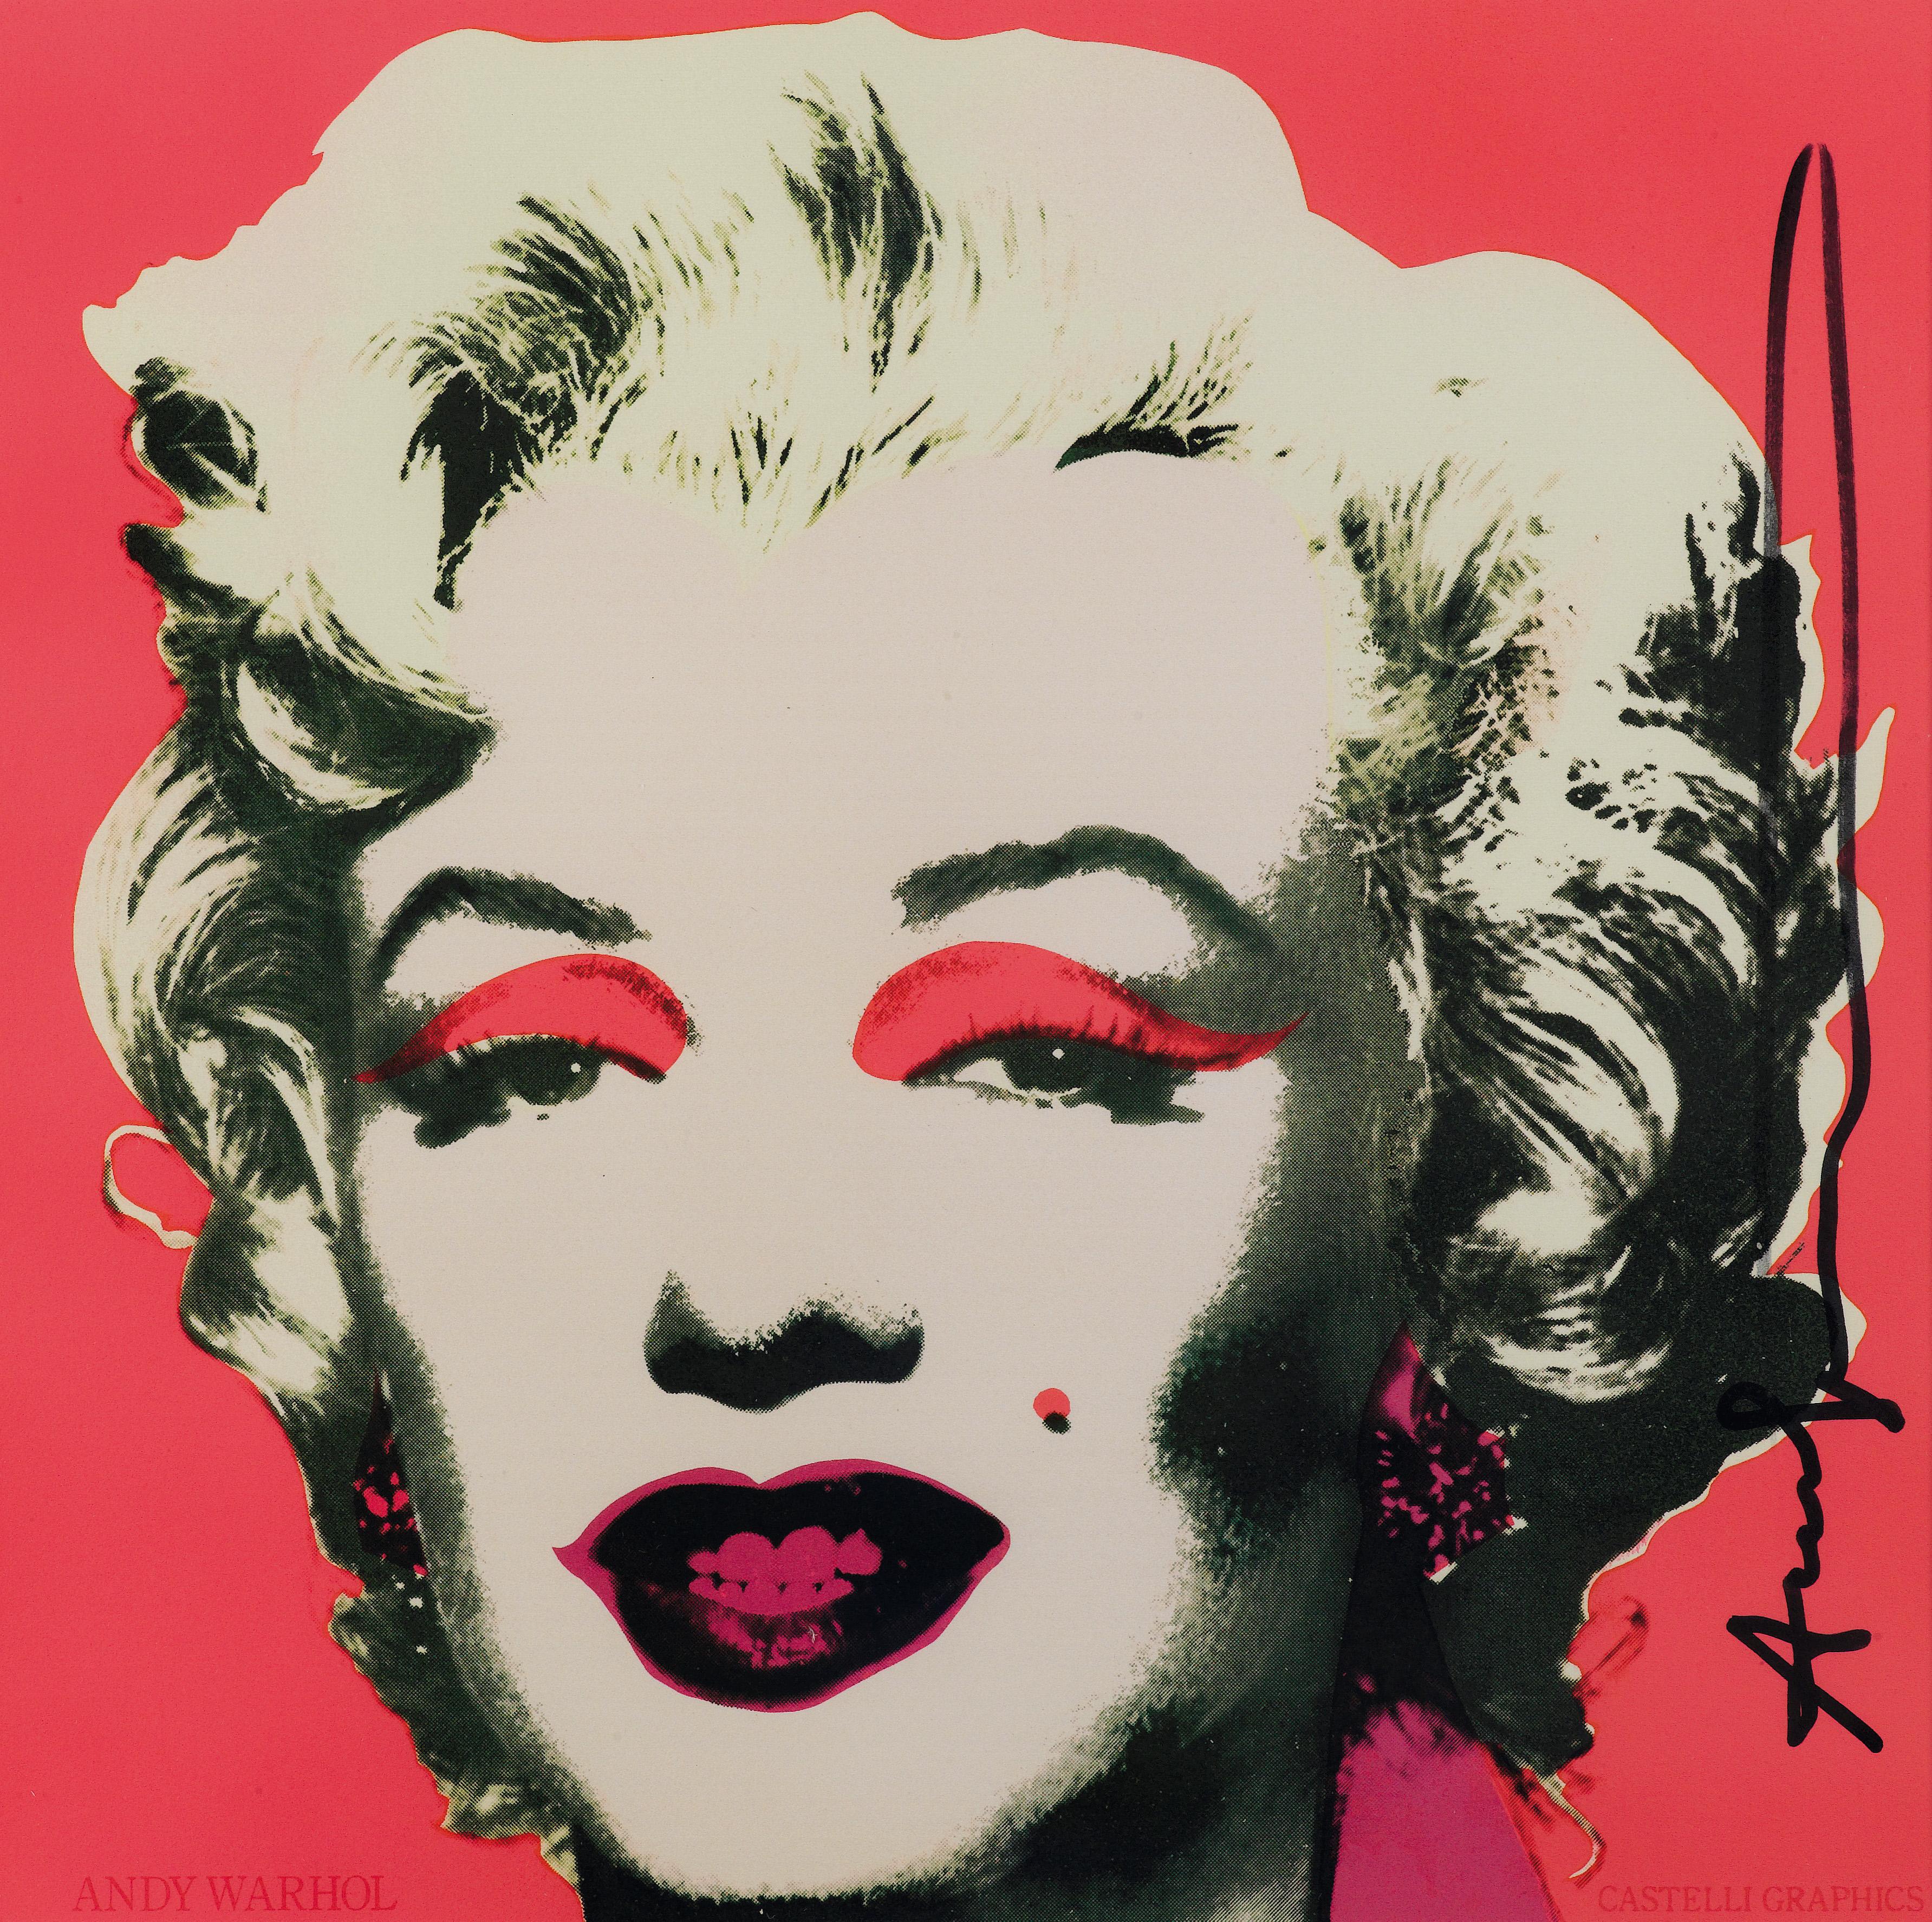 Marilyn Invitation is an original colored serigraph realized in 1981 by the Pop artist Andy Warhol.

Printed by Castelli Graphics. Signed with a black marker pen on the right. Very good conditions. Including frame: 66.4 x 66 cm.

It was created as a